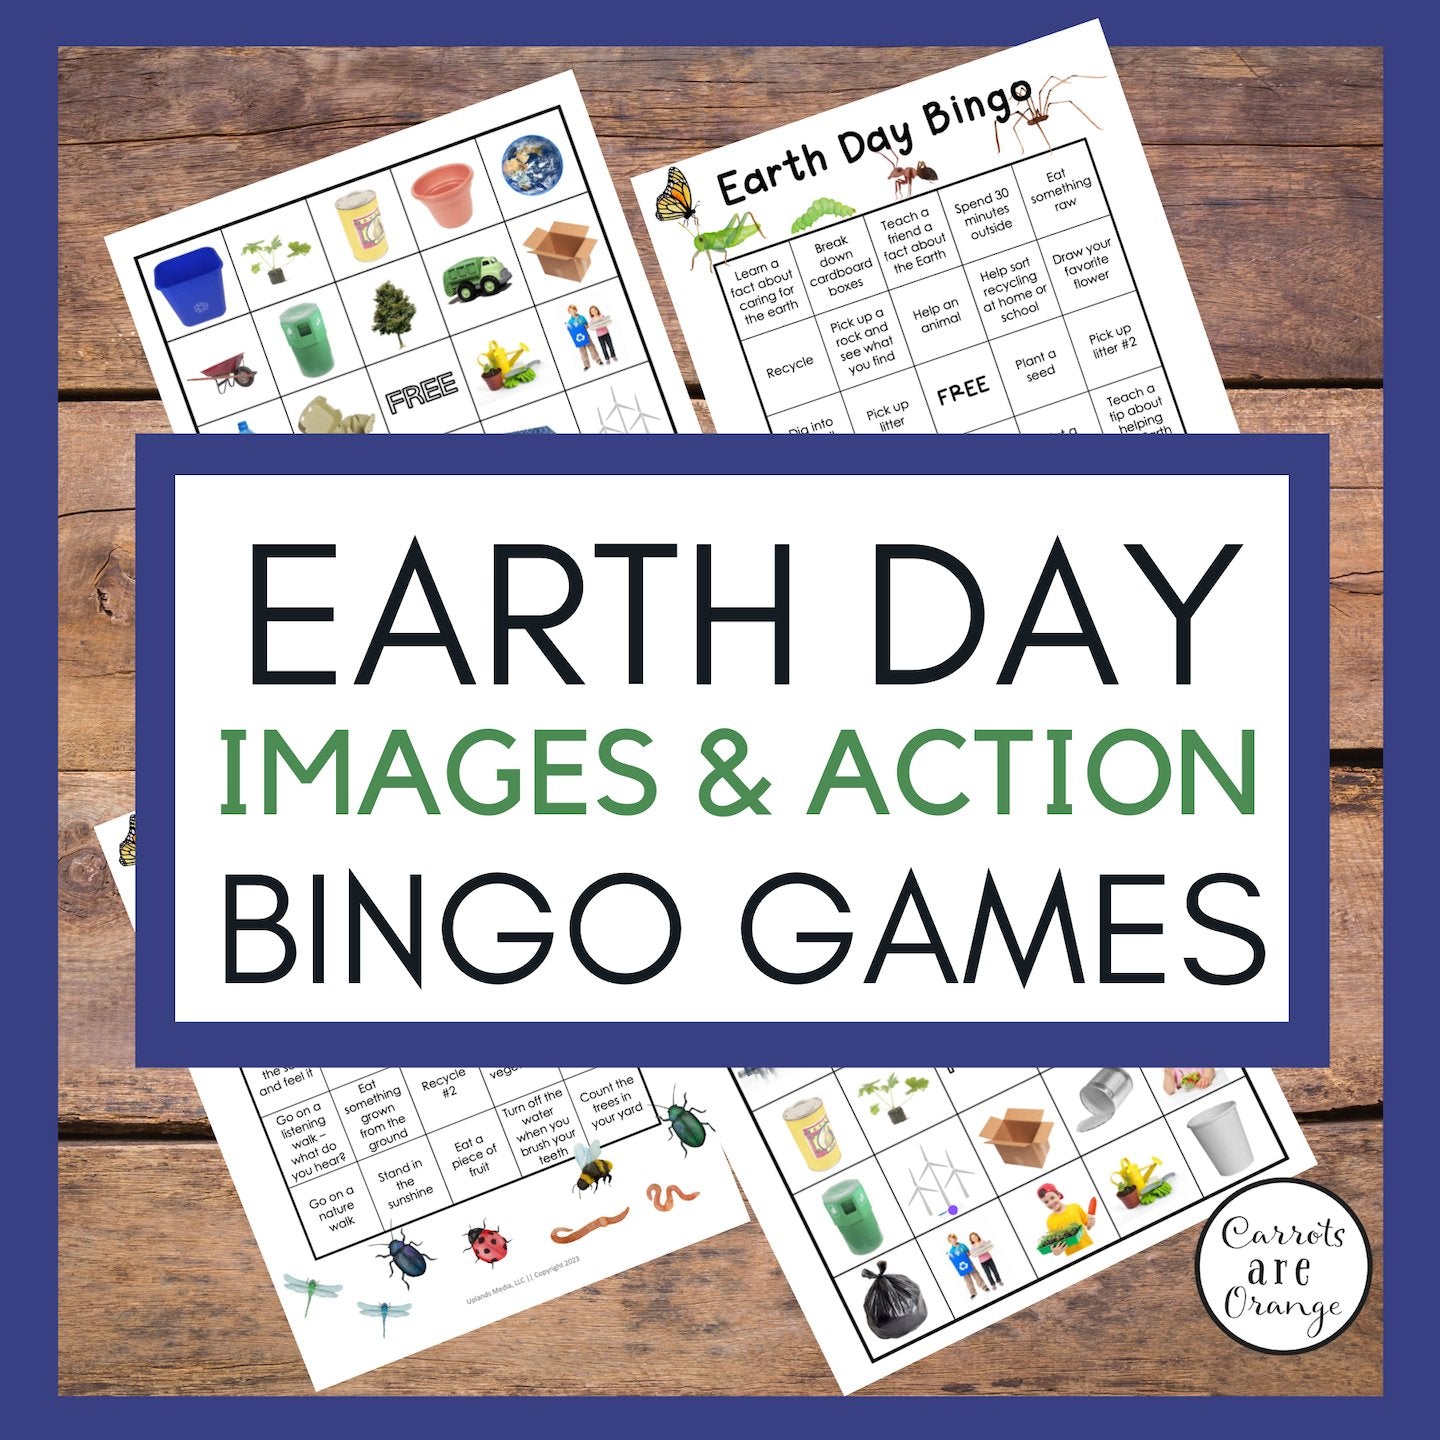 🌎 Earth Day Bingo - Printables by Carrots Are Orange